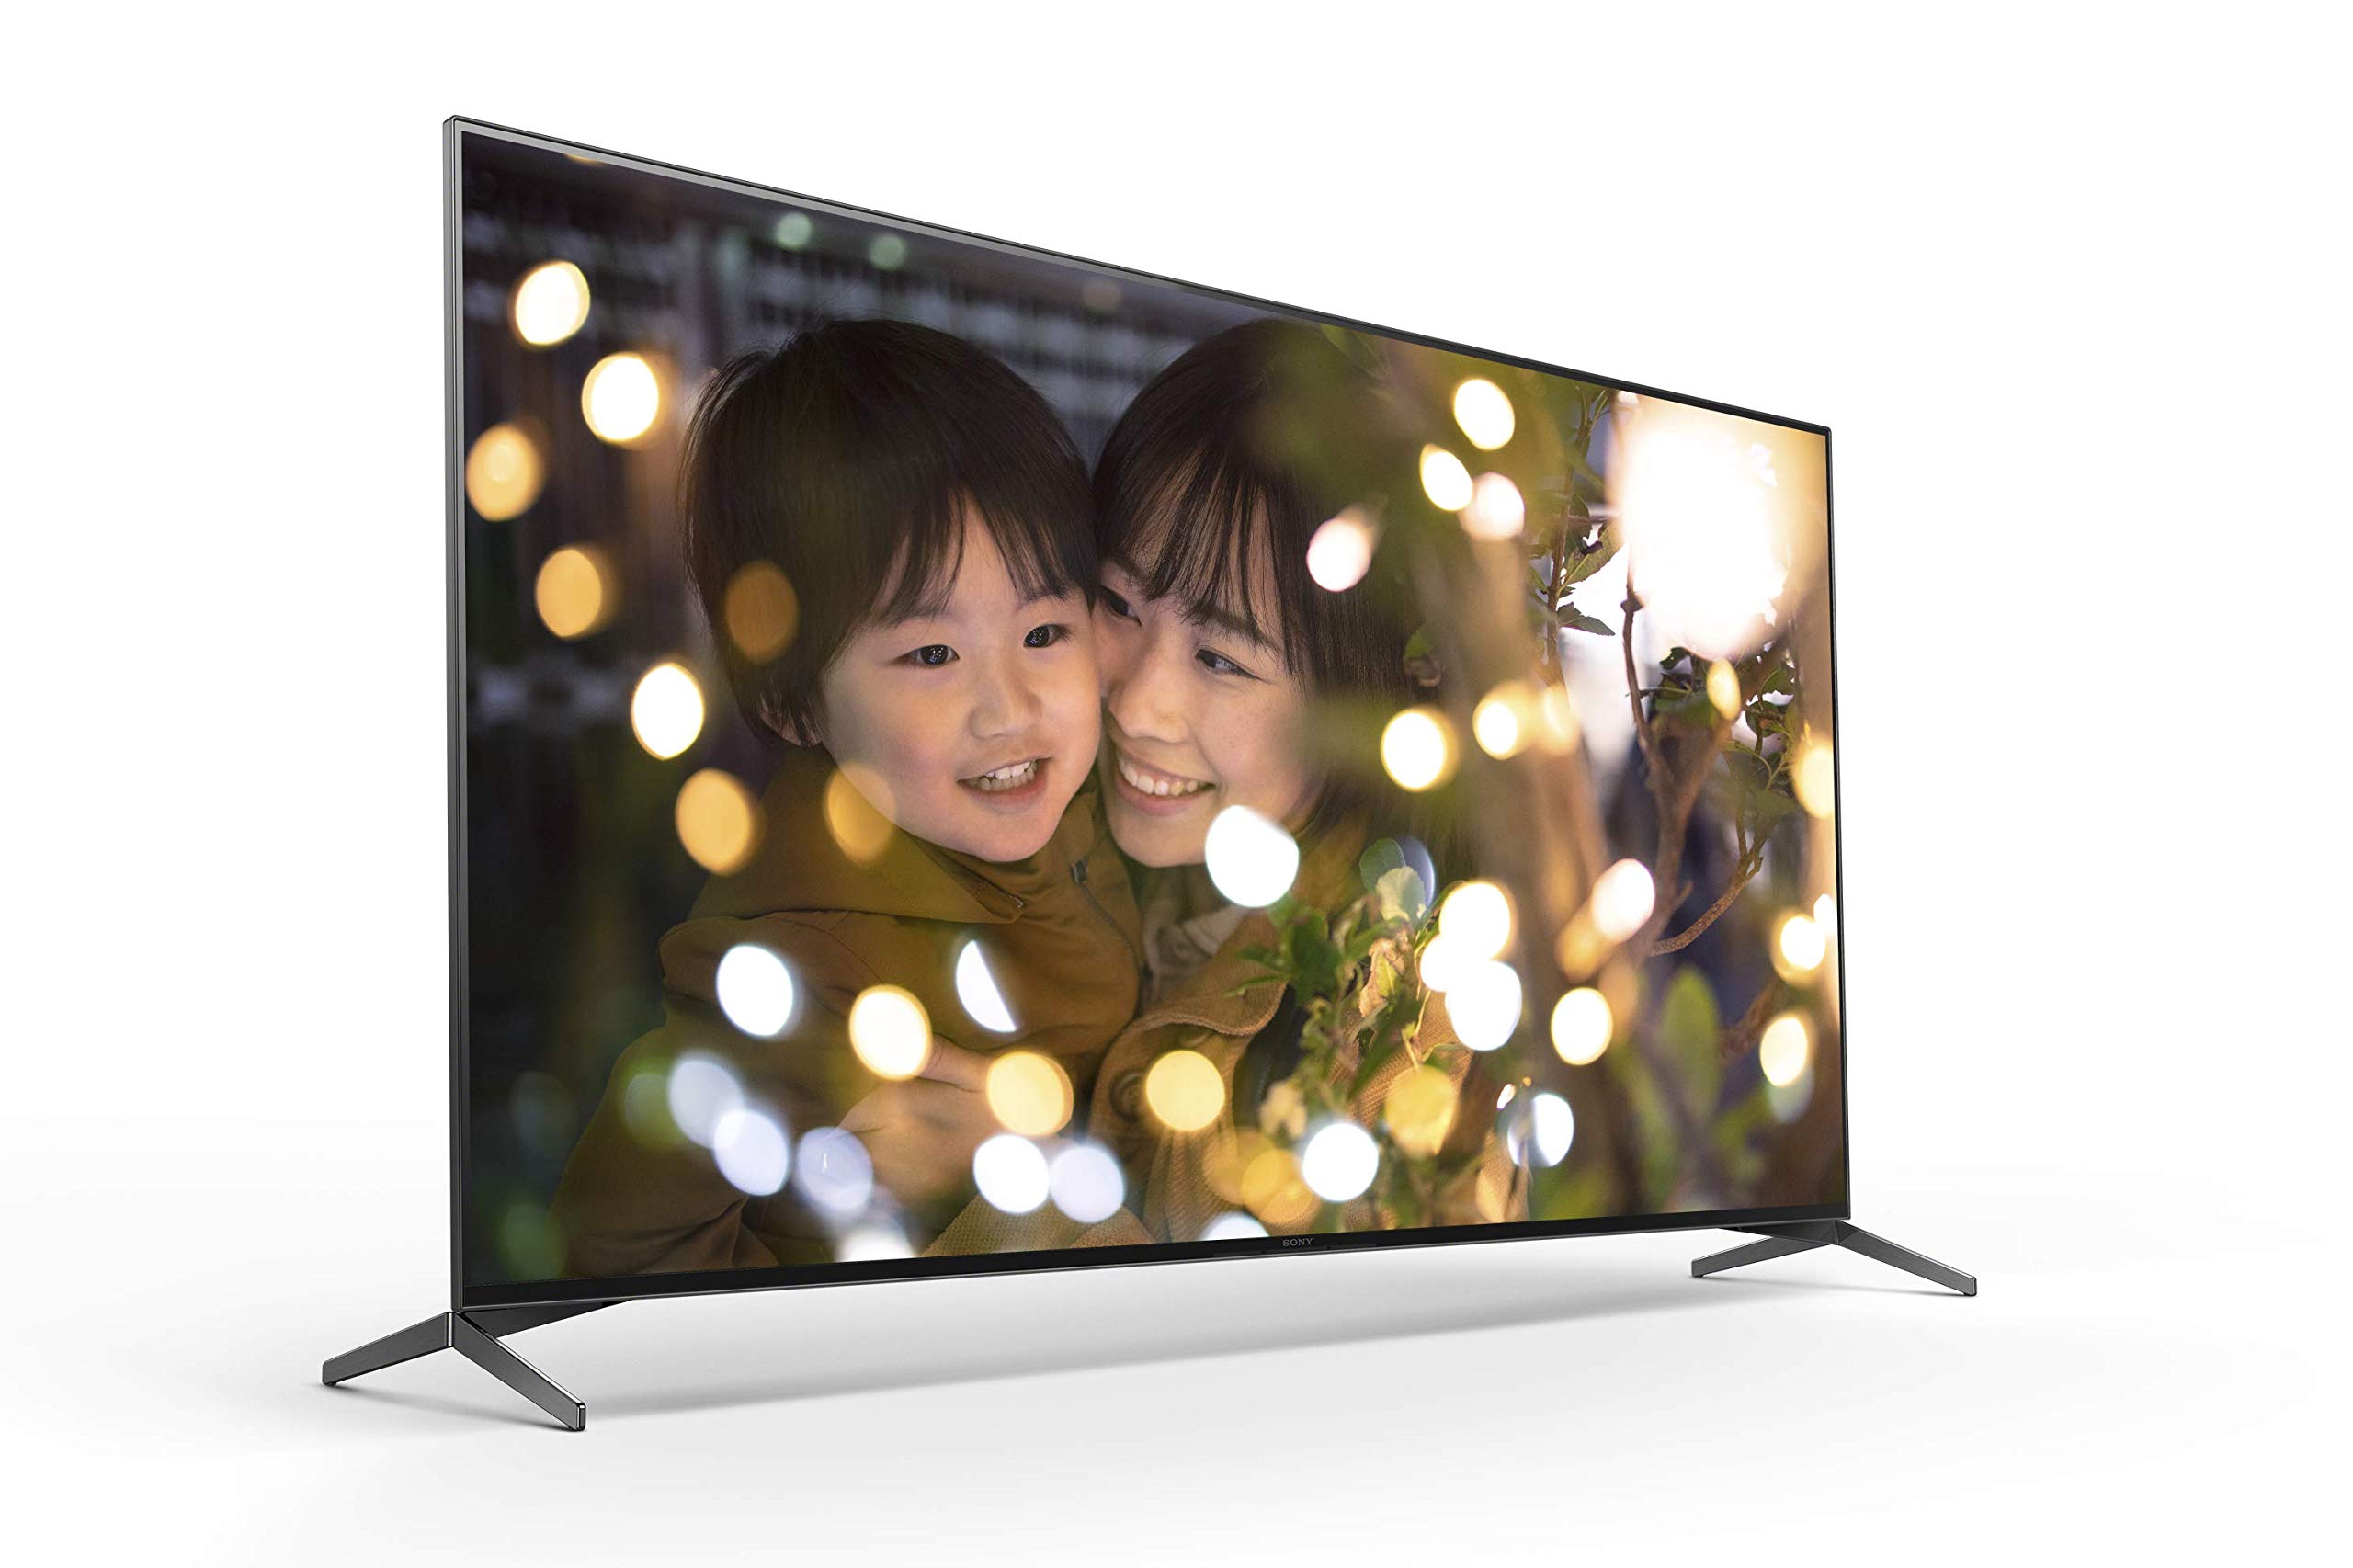 Sony X950H 65-inch TV: 4K Ultra HD Smart LED TV with HDR and Alexa Compatibility - 2020 Model